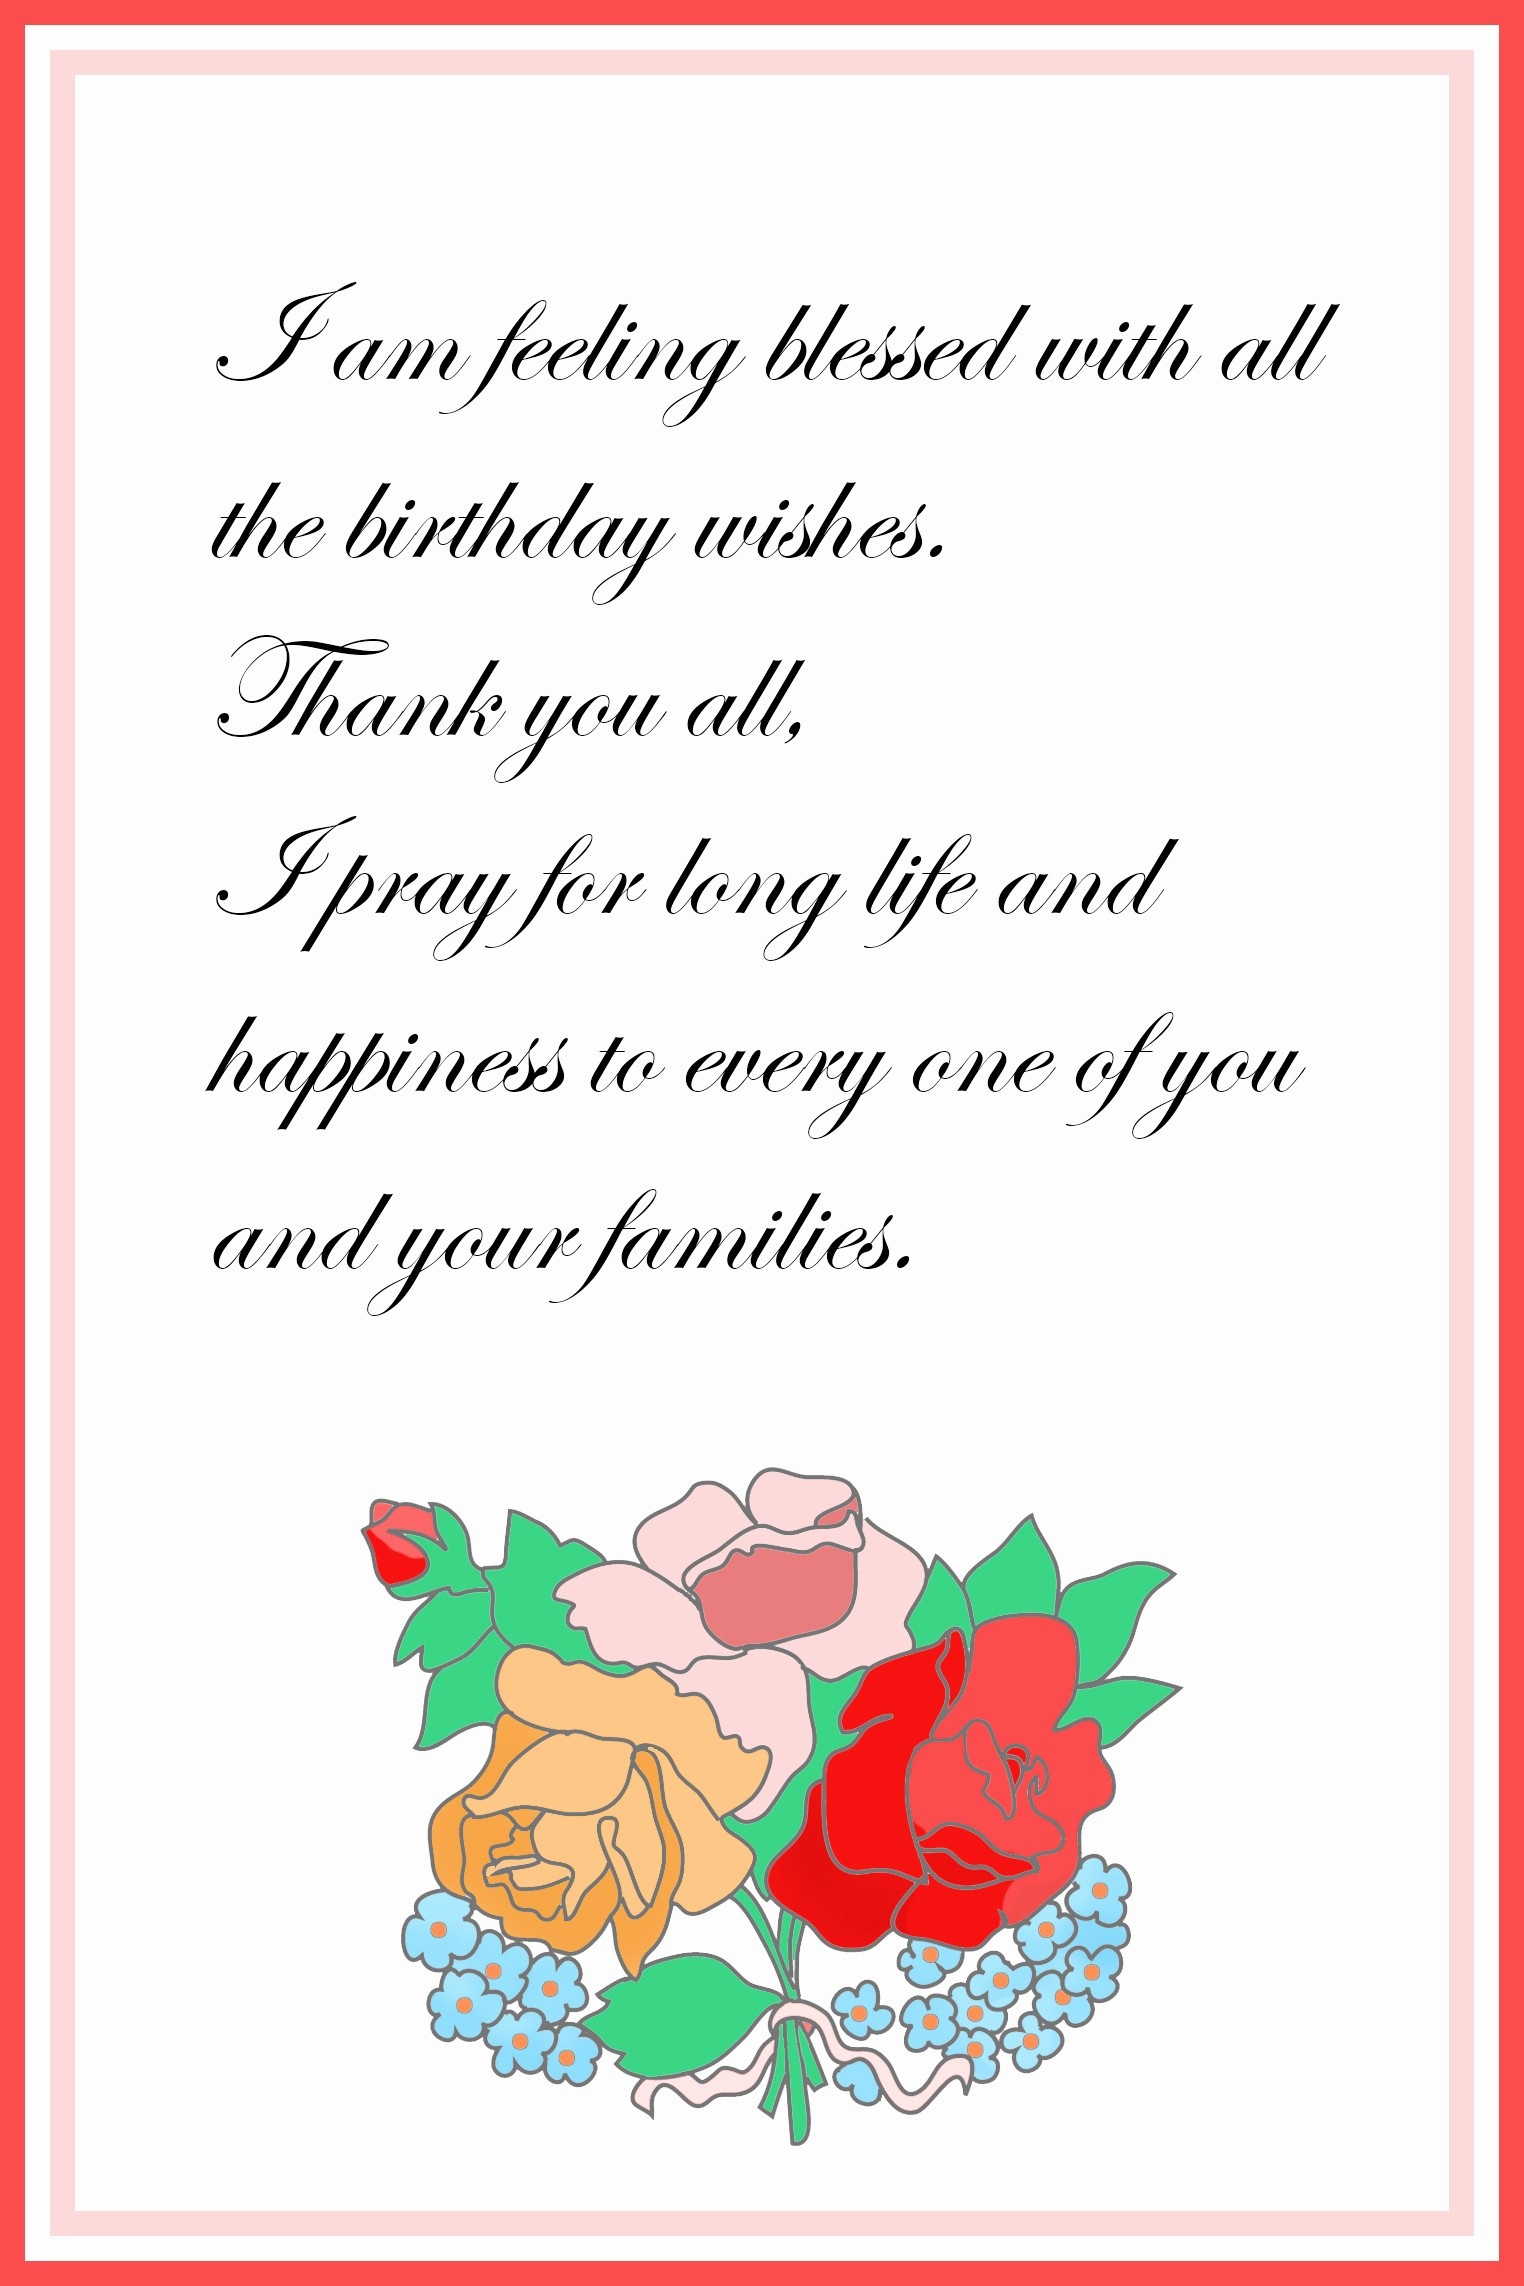 021 Hallmark Thank You Card Template Awesome Printable Free Birthday - Free Printable Hallmark Cards